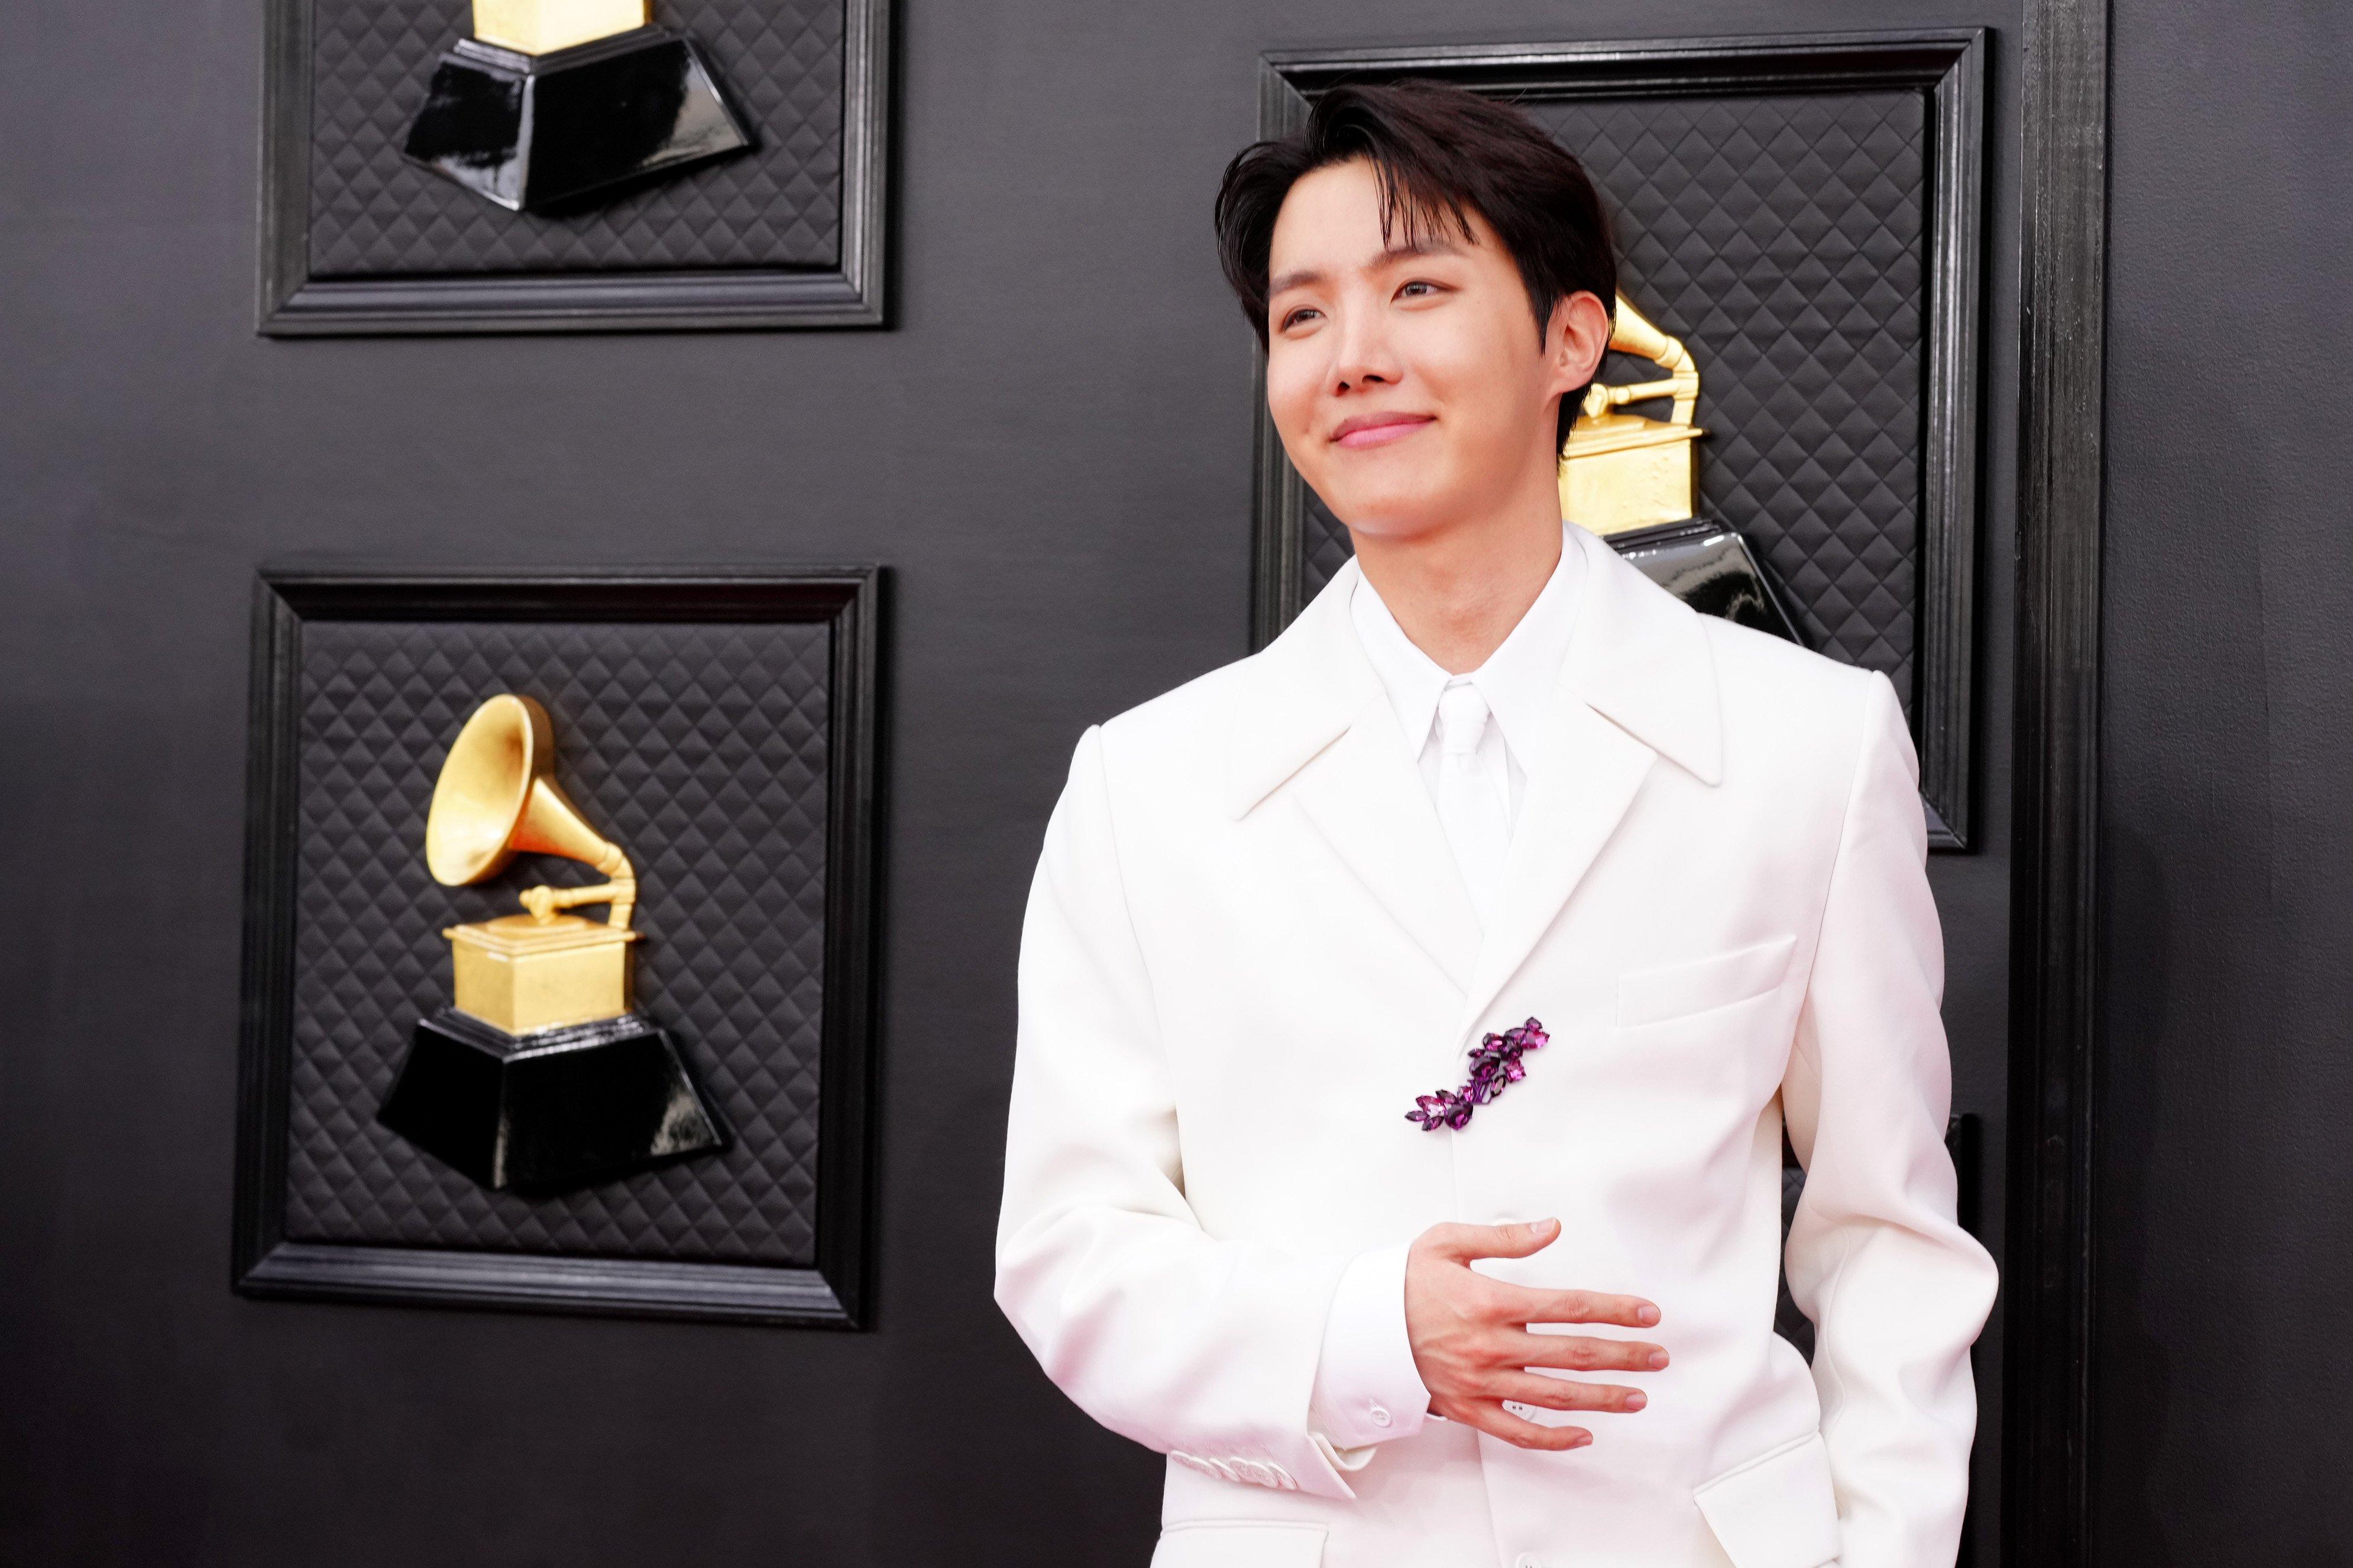 j-hope at the GRAMMYs 2022